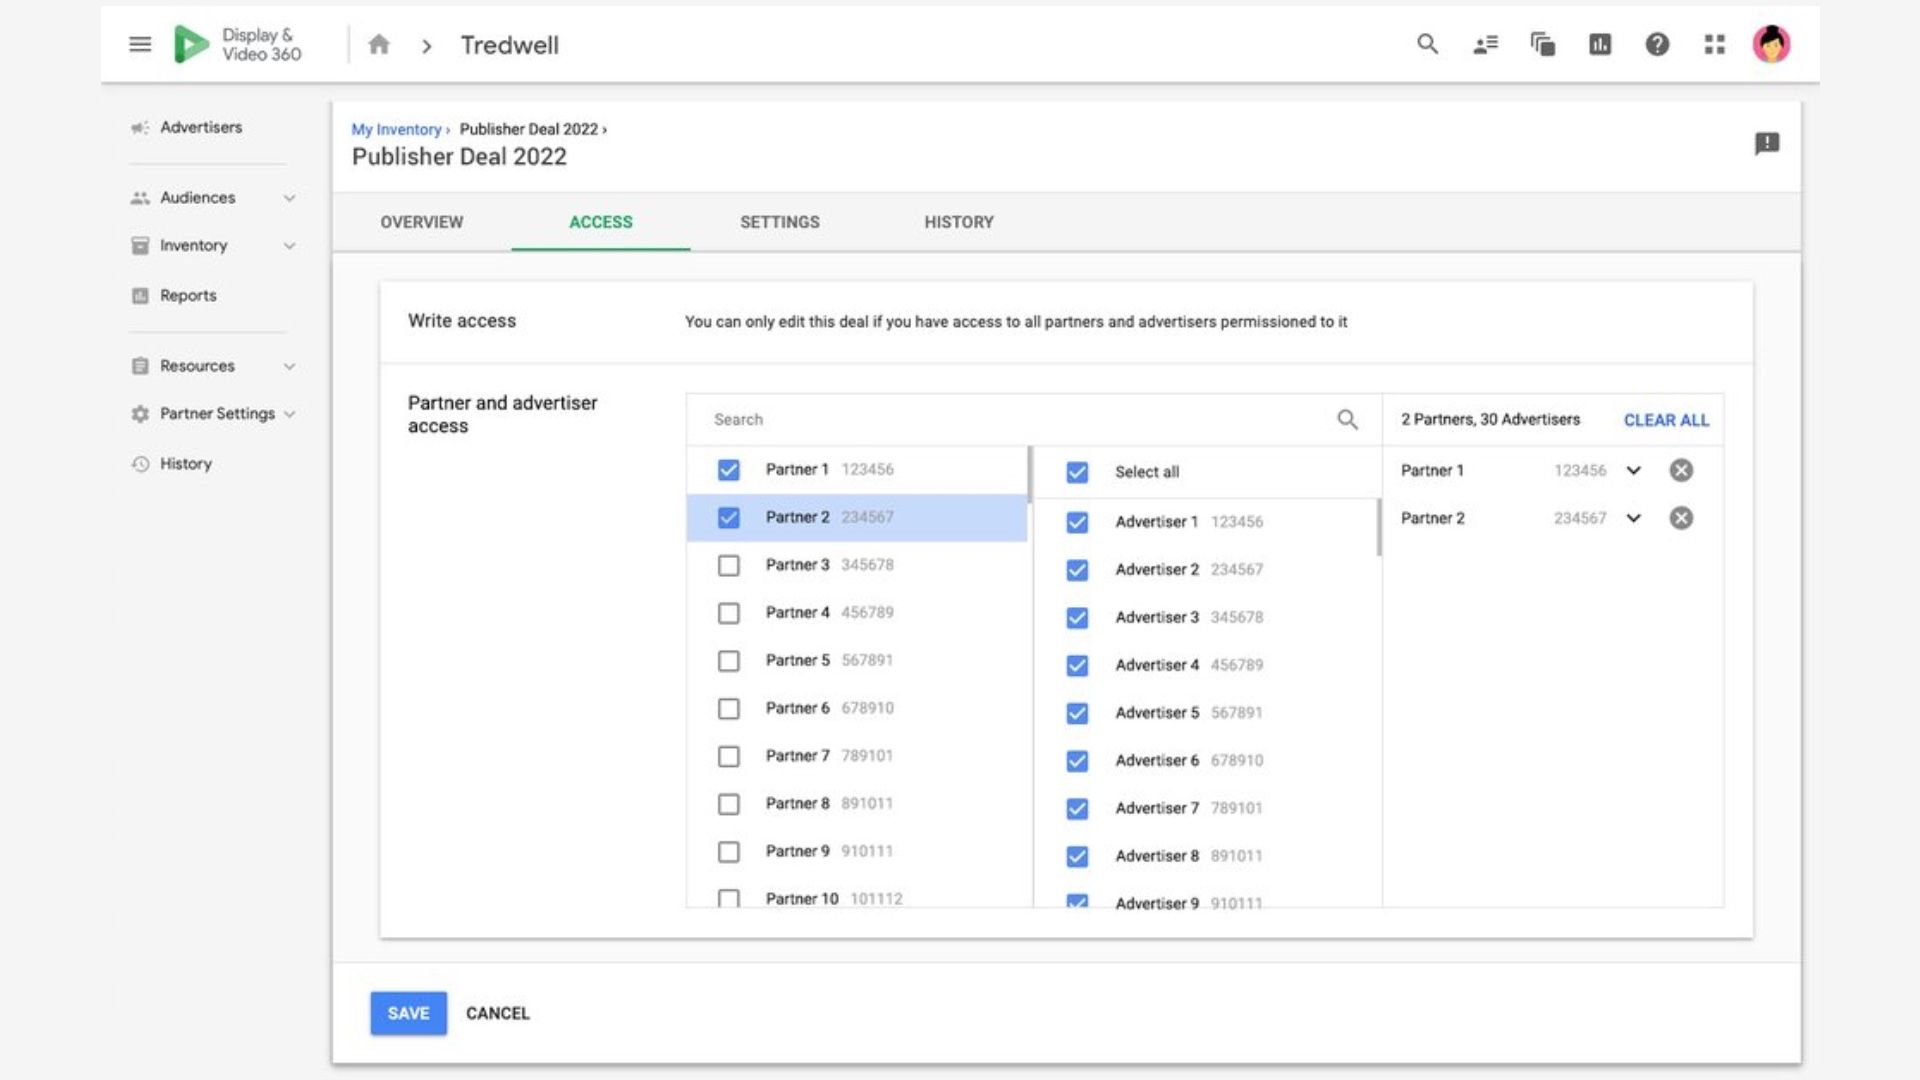 Google releases a new tool to manage deals in DV360